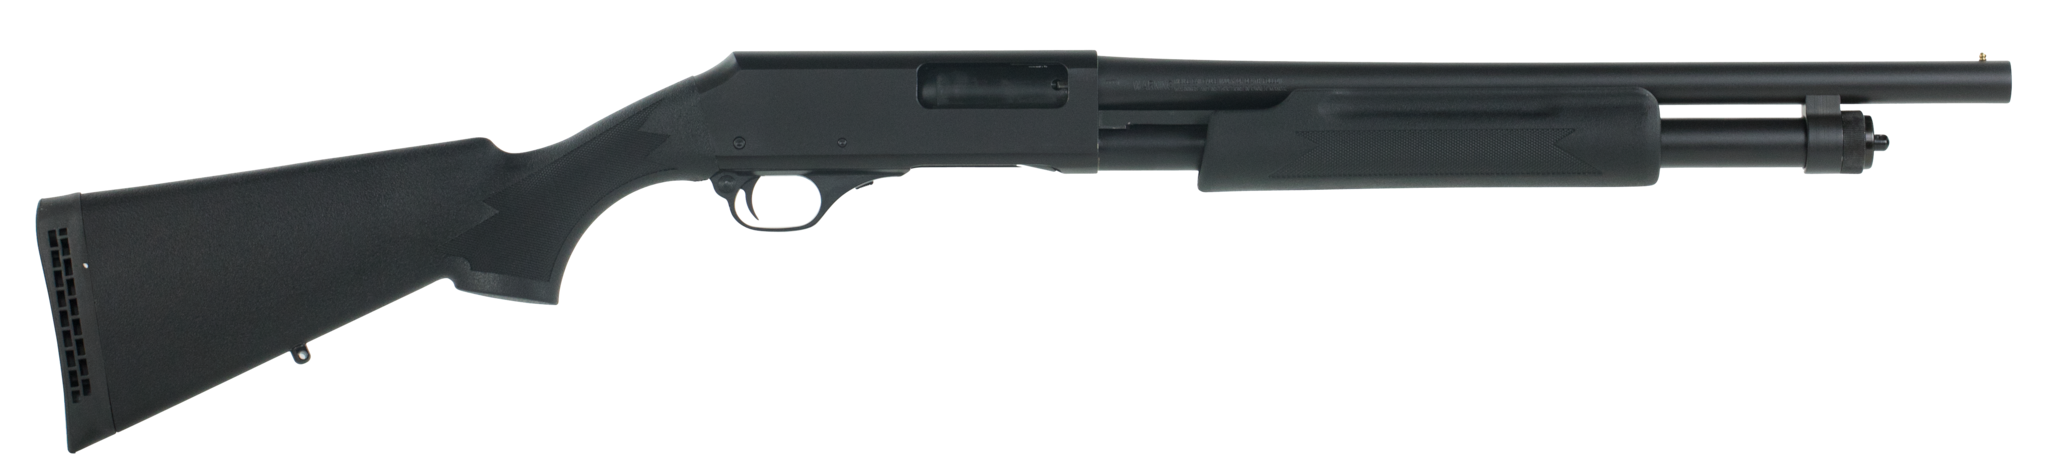 Image of H&R PARDNER PROTECTOR